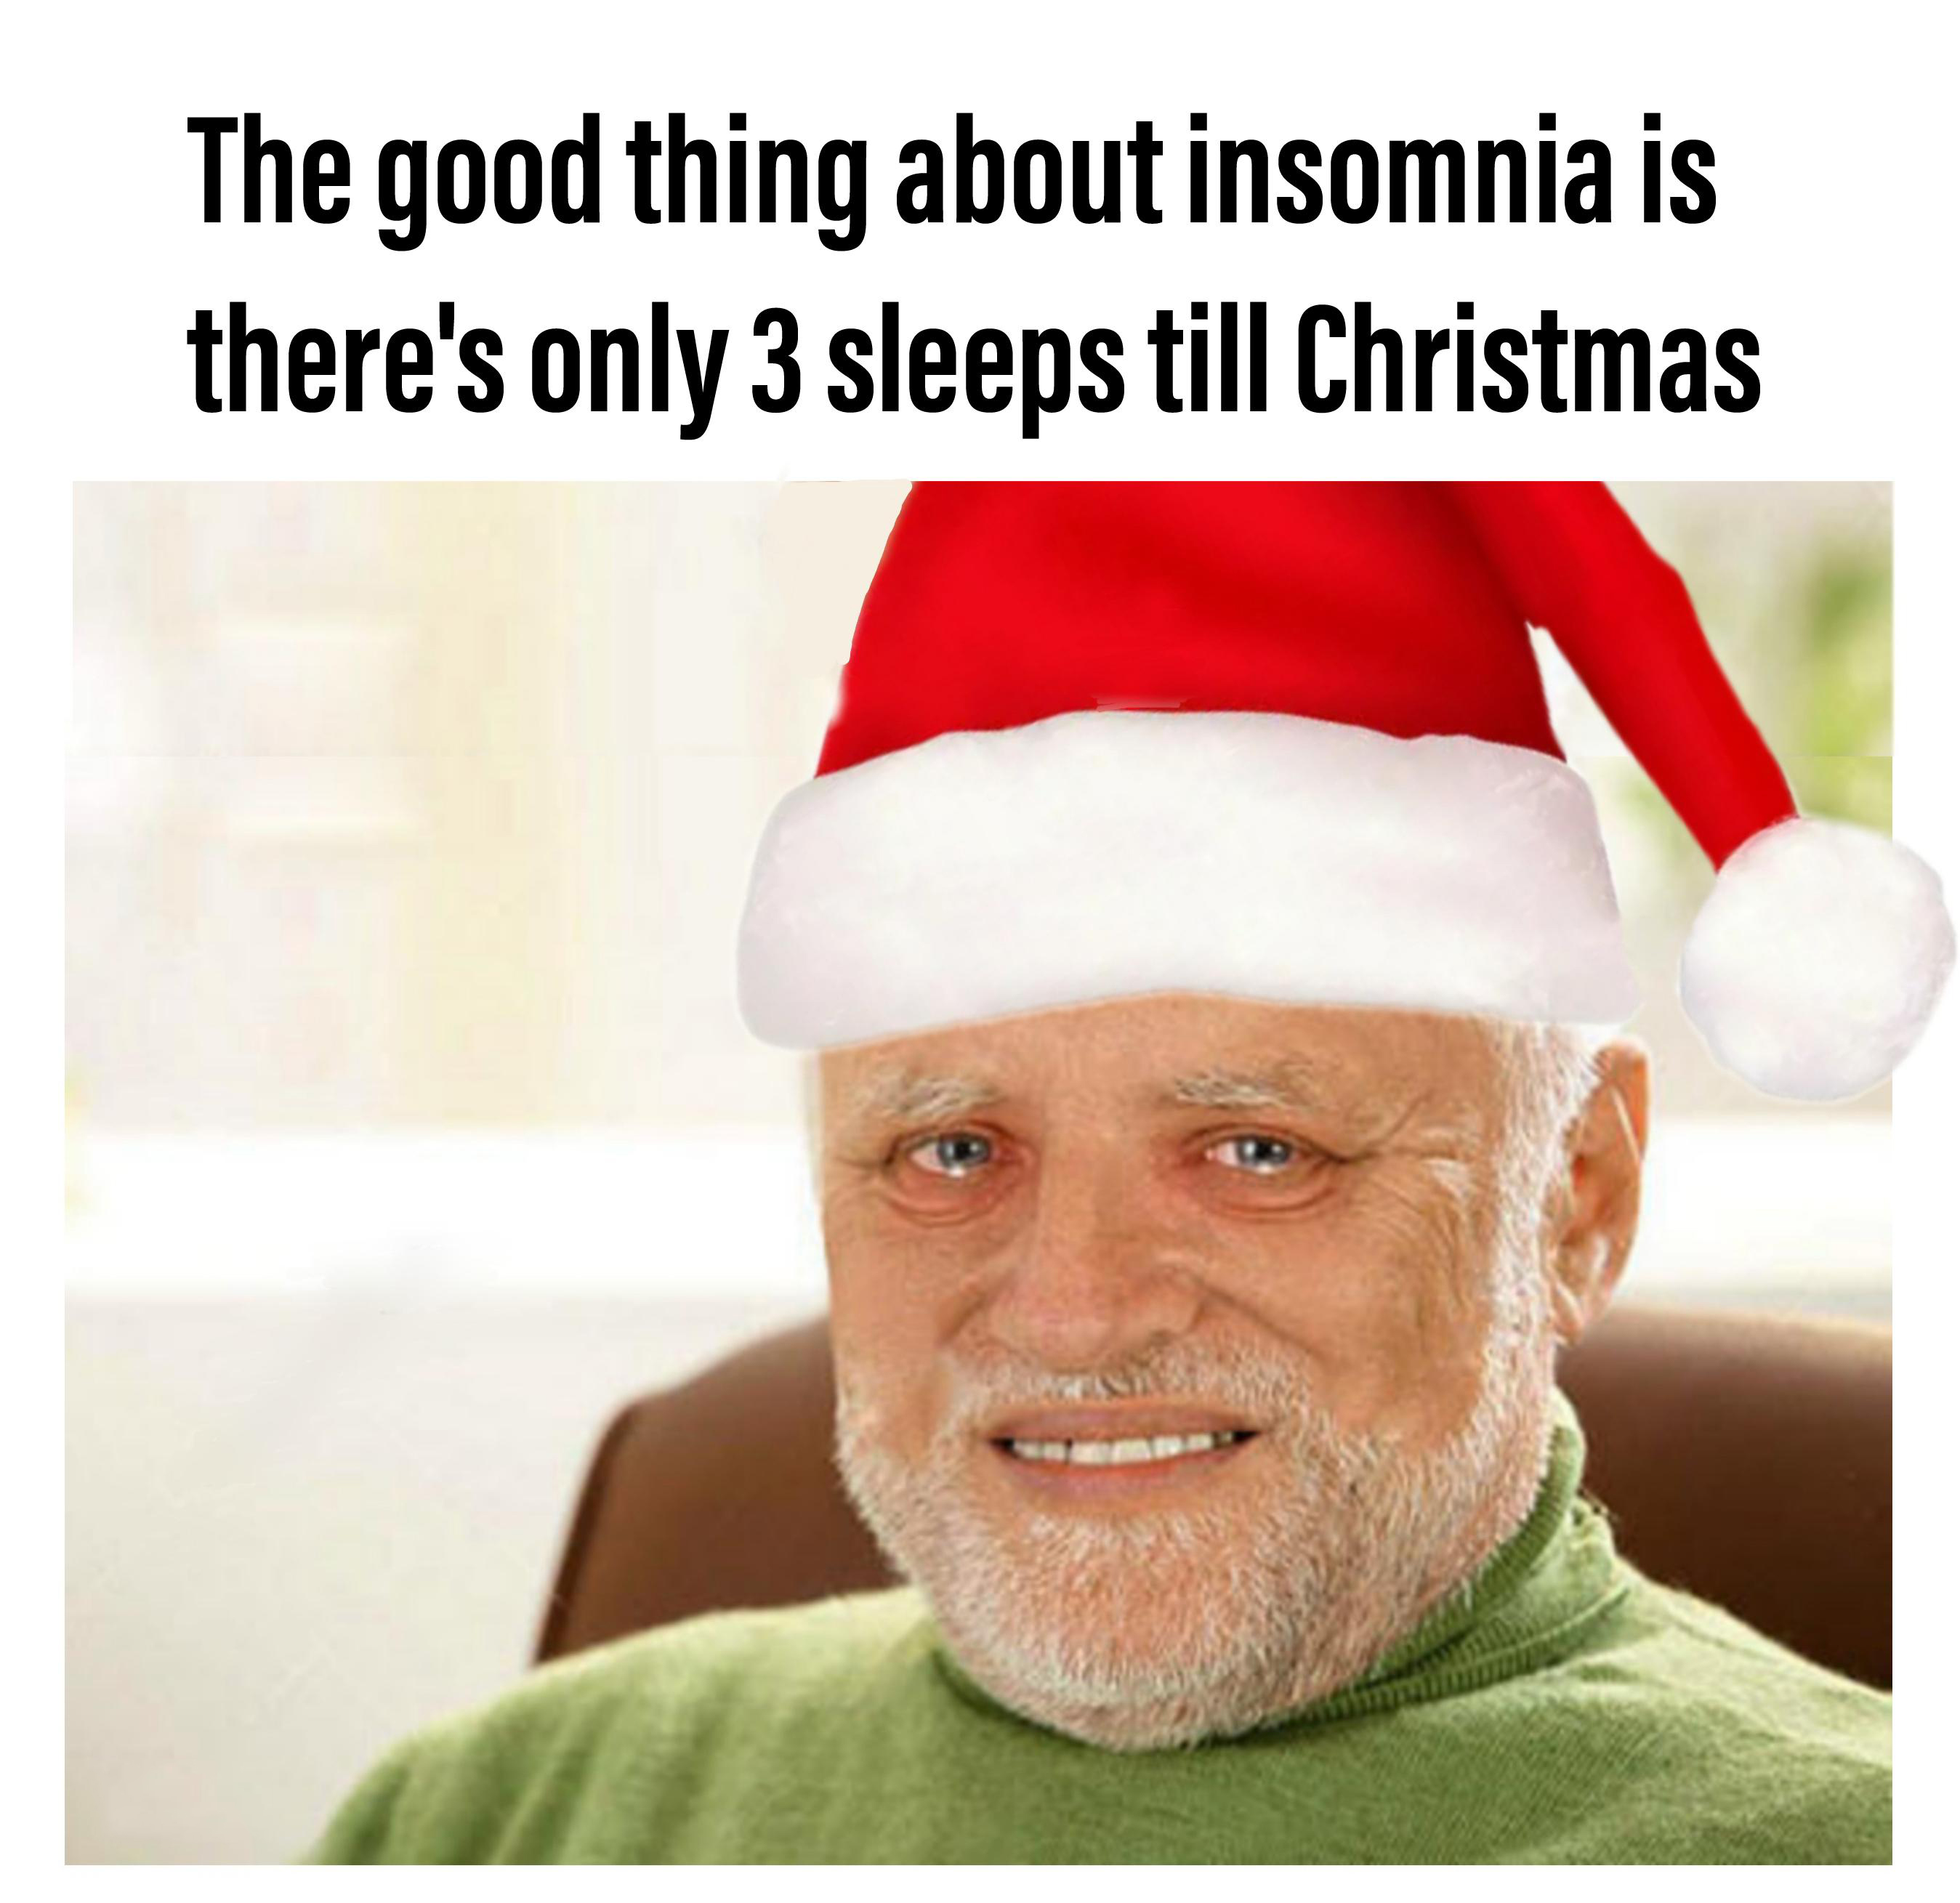 rational functional tester - The good thing about insomnia is there's only 3 sleeps till Christmas